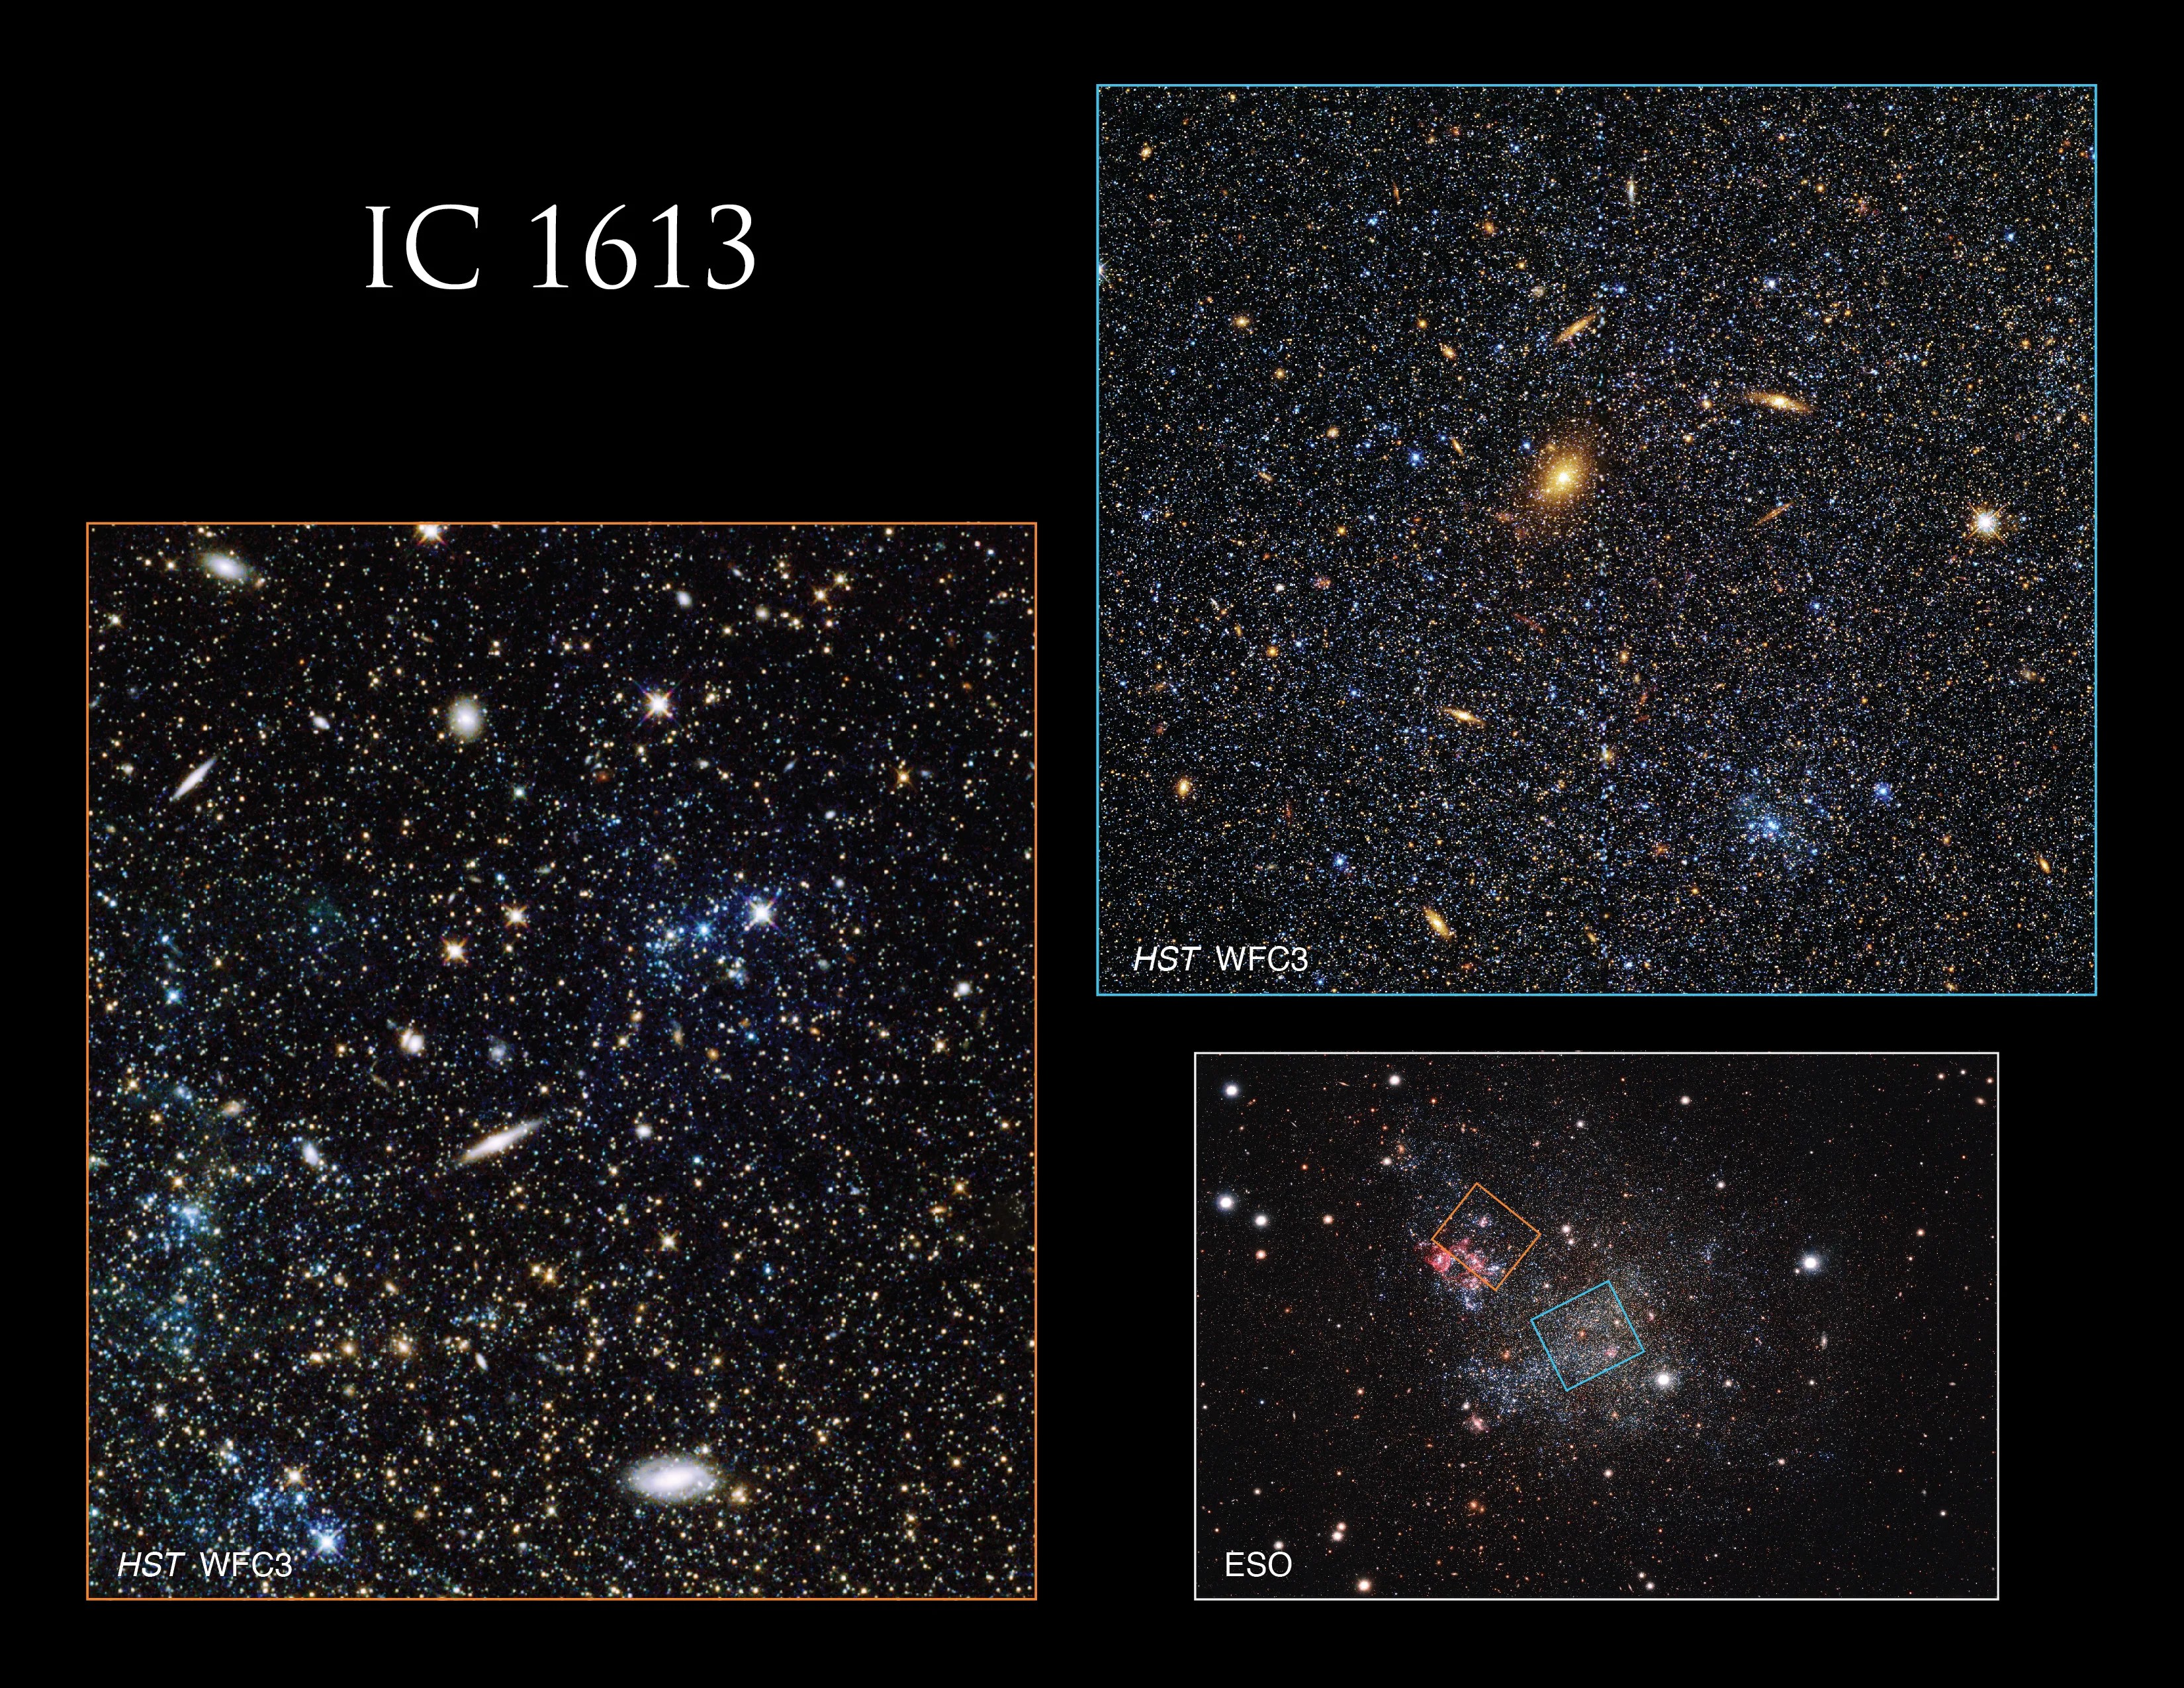 This context image shows two regions of Caldwell 51 (IC 1613) imaged by Hubble’s Wide Field Camera 3 (WFC3).